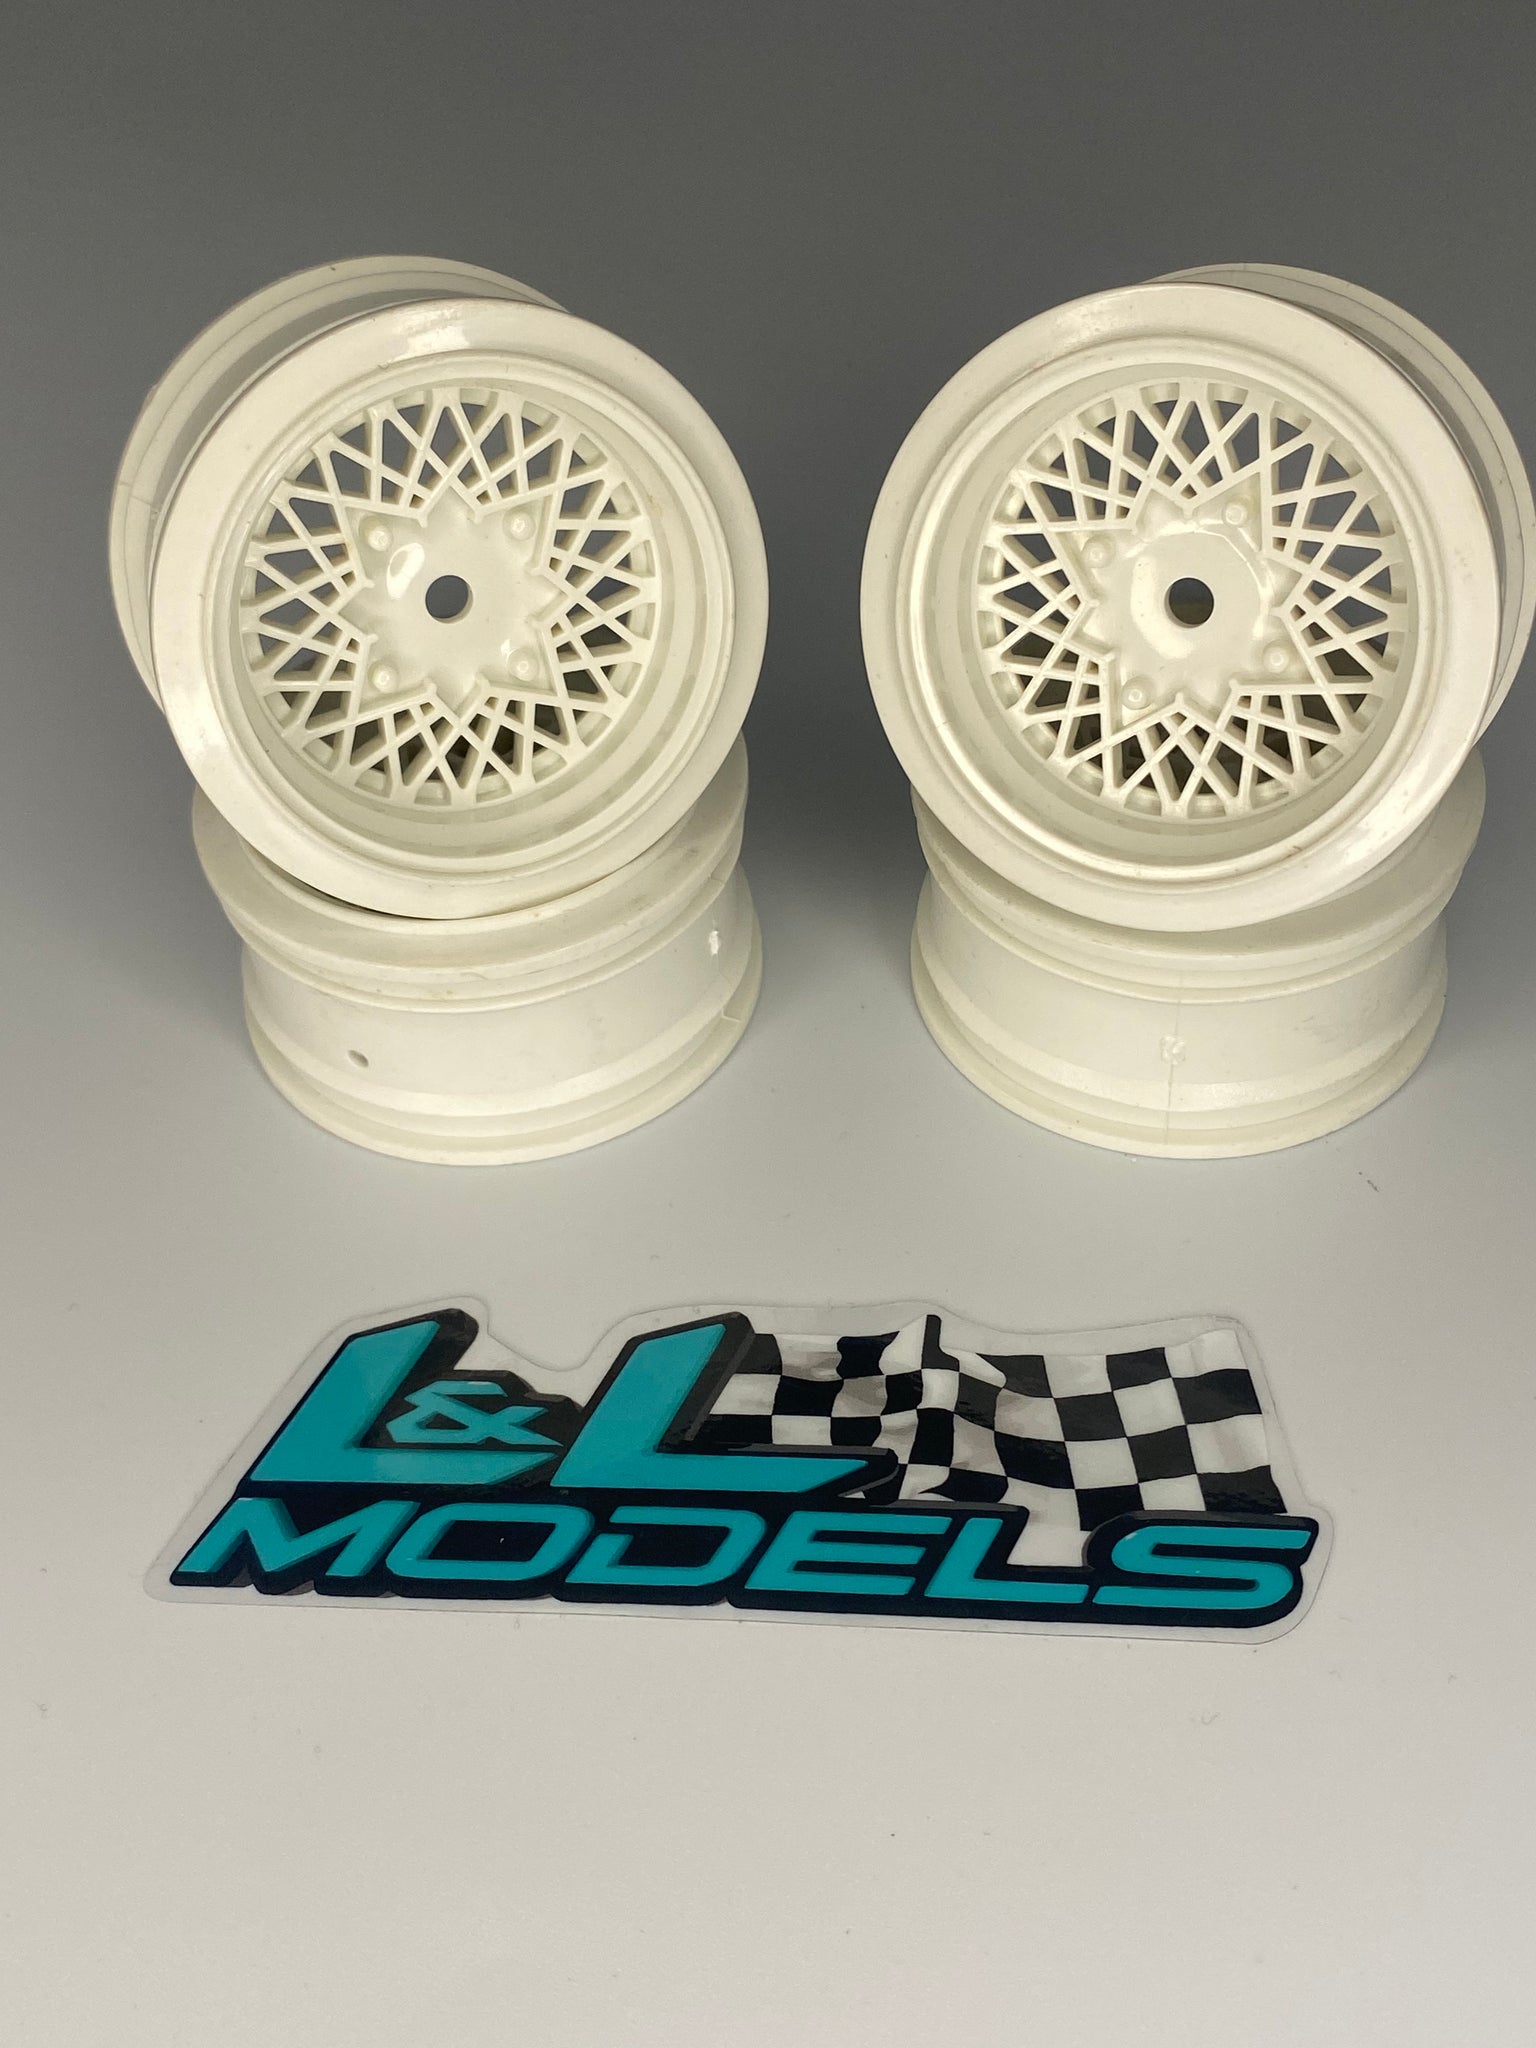 BBS White-Wall 6mm offset 26mm Rc Touring Car Wheels For Tamiya TT01 TT02 HPI Kyosho 12mm Hex Not M Chassis lg056wW